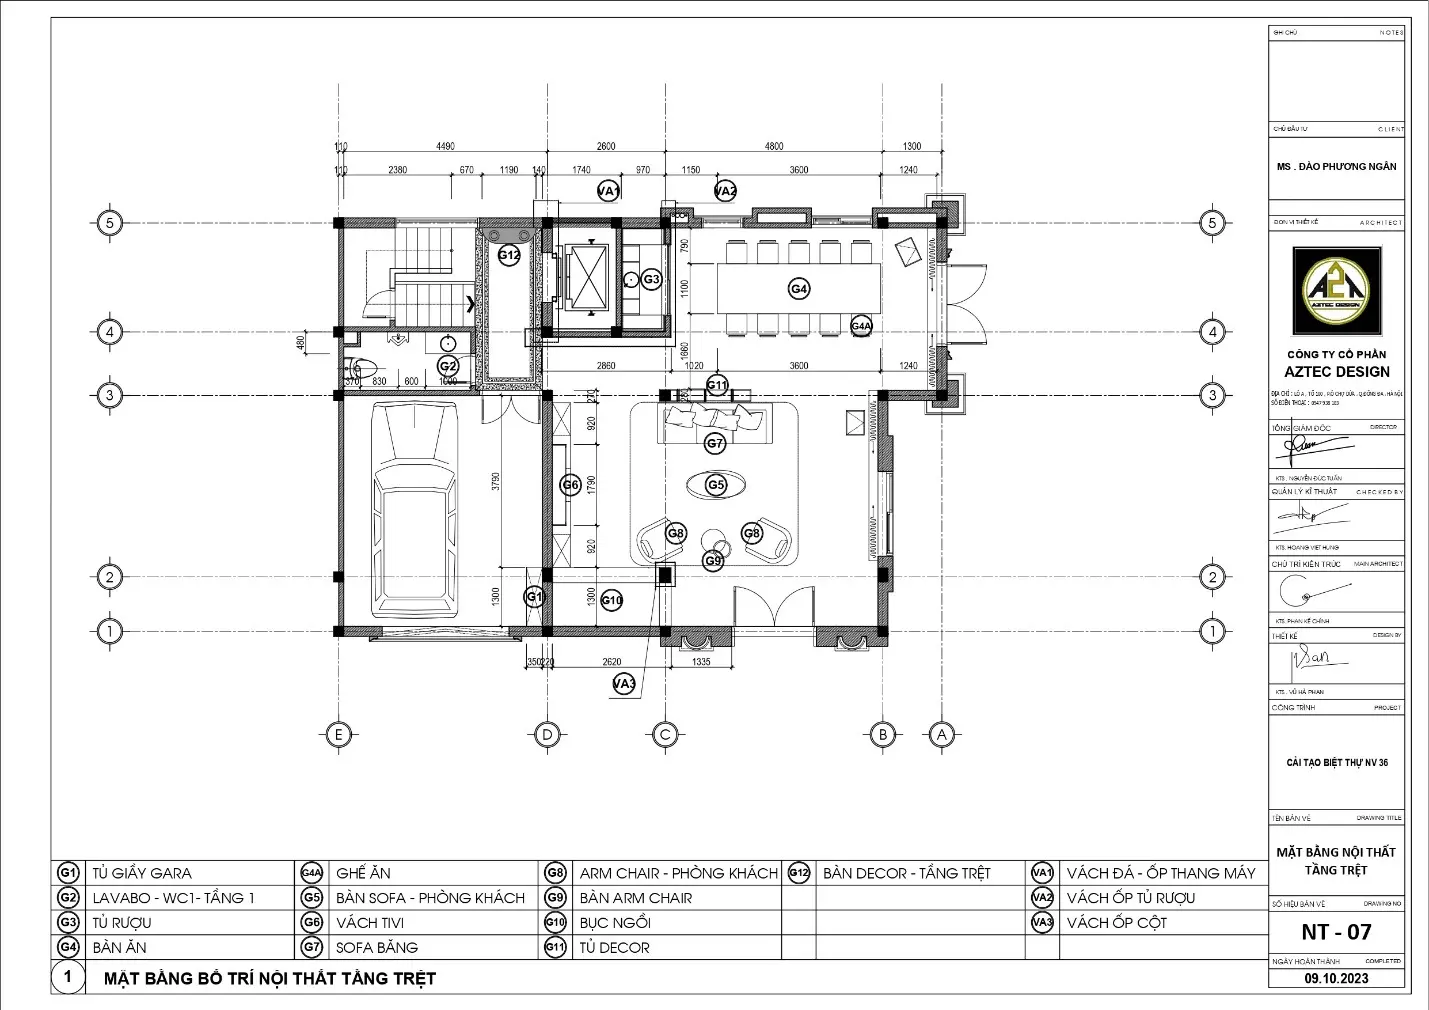 A blueprint of a houseDescription automatically generated